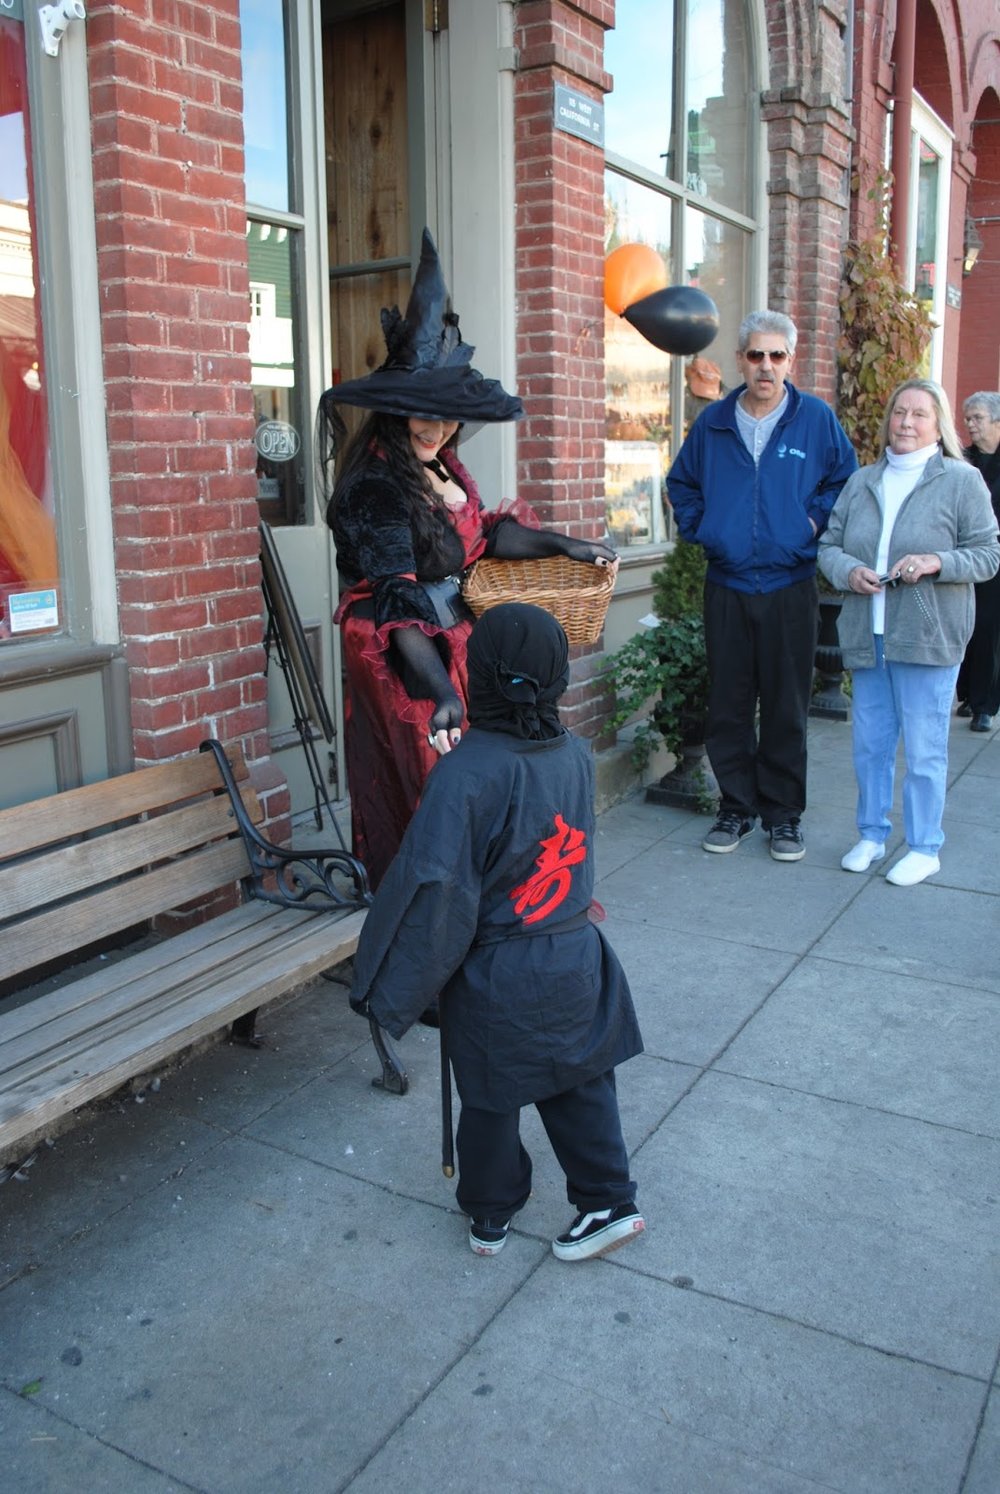 JACKSONVILLE'S HARVEST HALLOWEEN PROMENADE - What to do in Southern Oregon